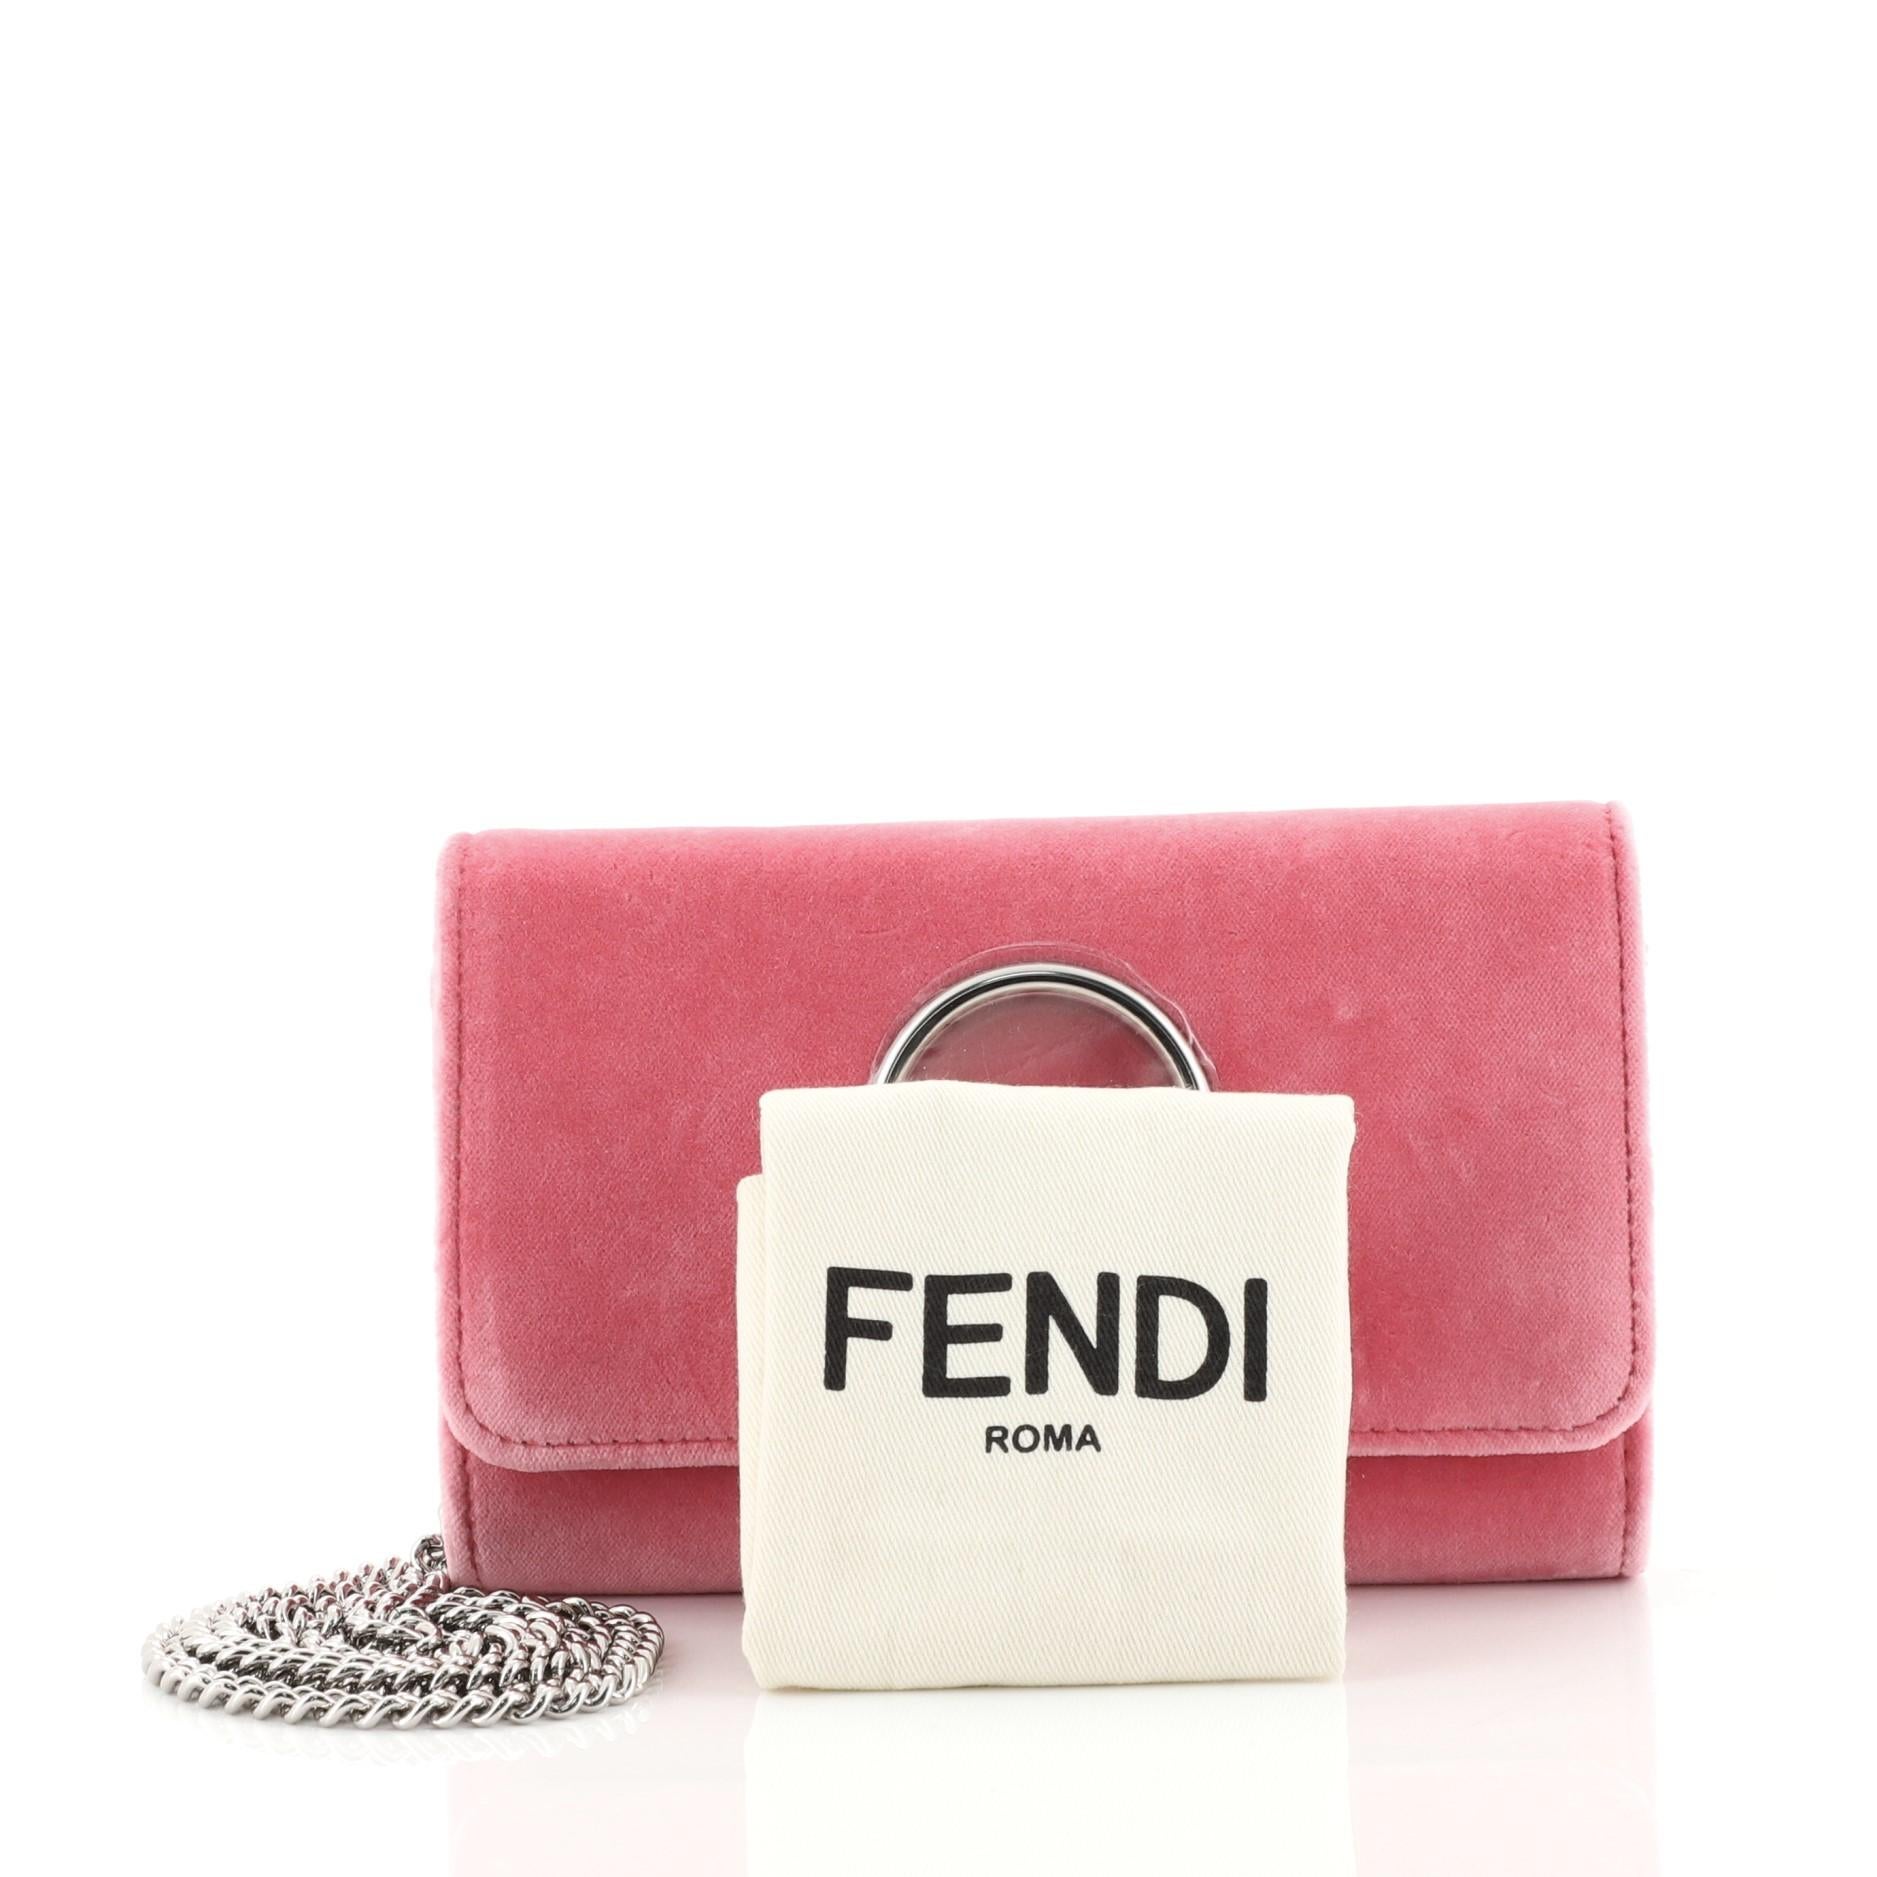 This Fendi Kan I F Wallet On Chain Velvet, crafted in pink velvet, features chain link strap, front flap, and silver-tone hardware. Its magnetic snap closure opens to a gray fabric interior with zip and slip pocket. 

Estimated Retail Price: